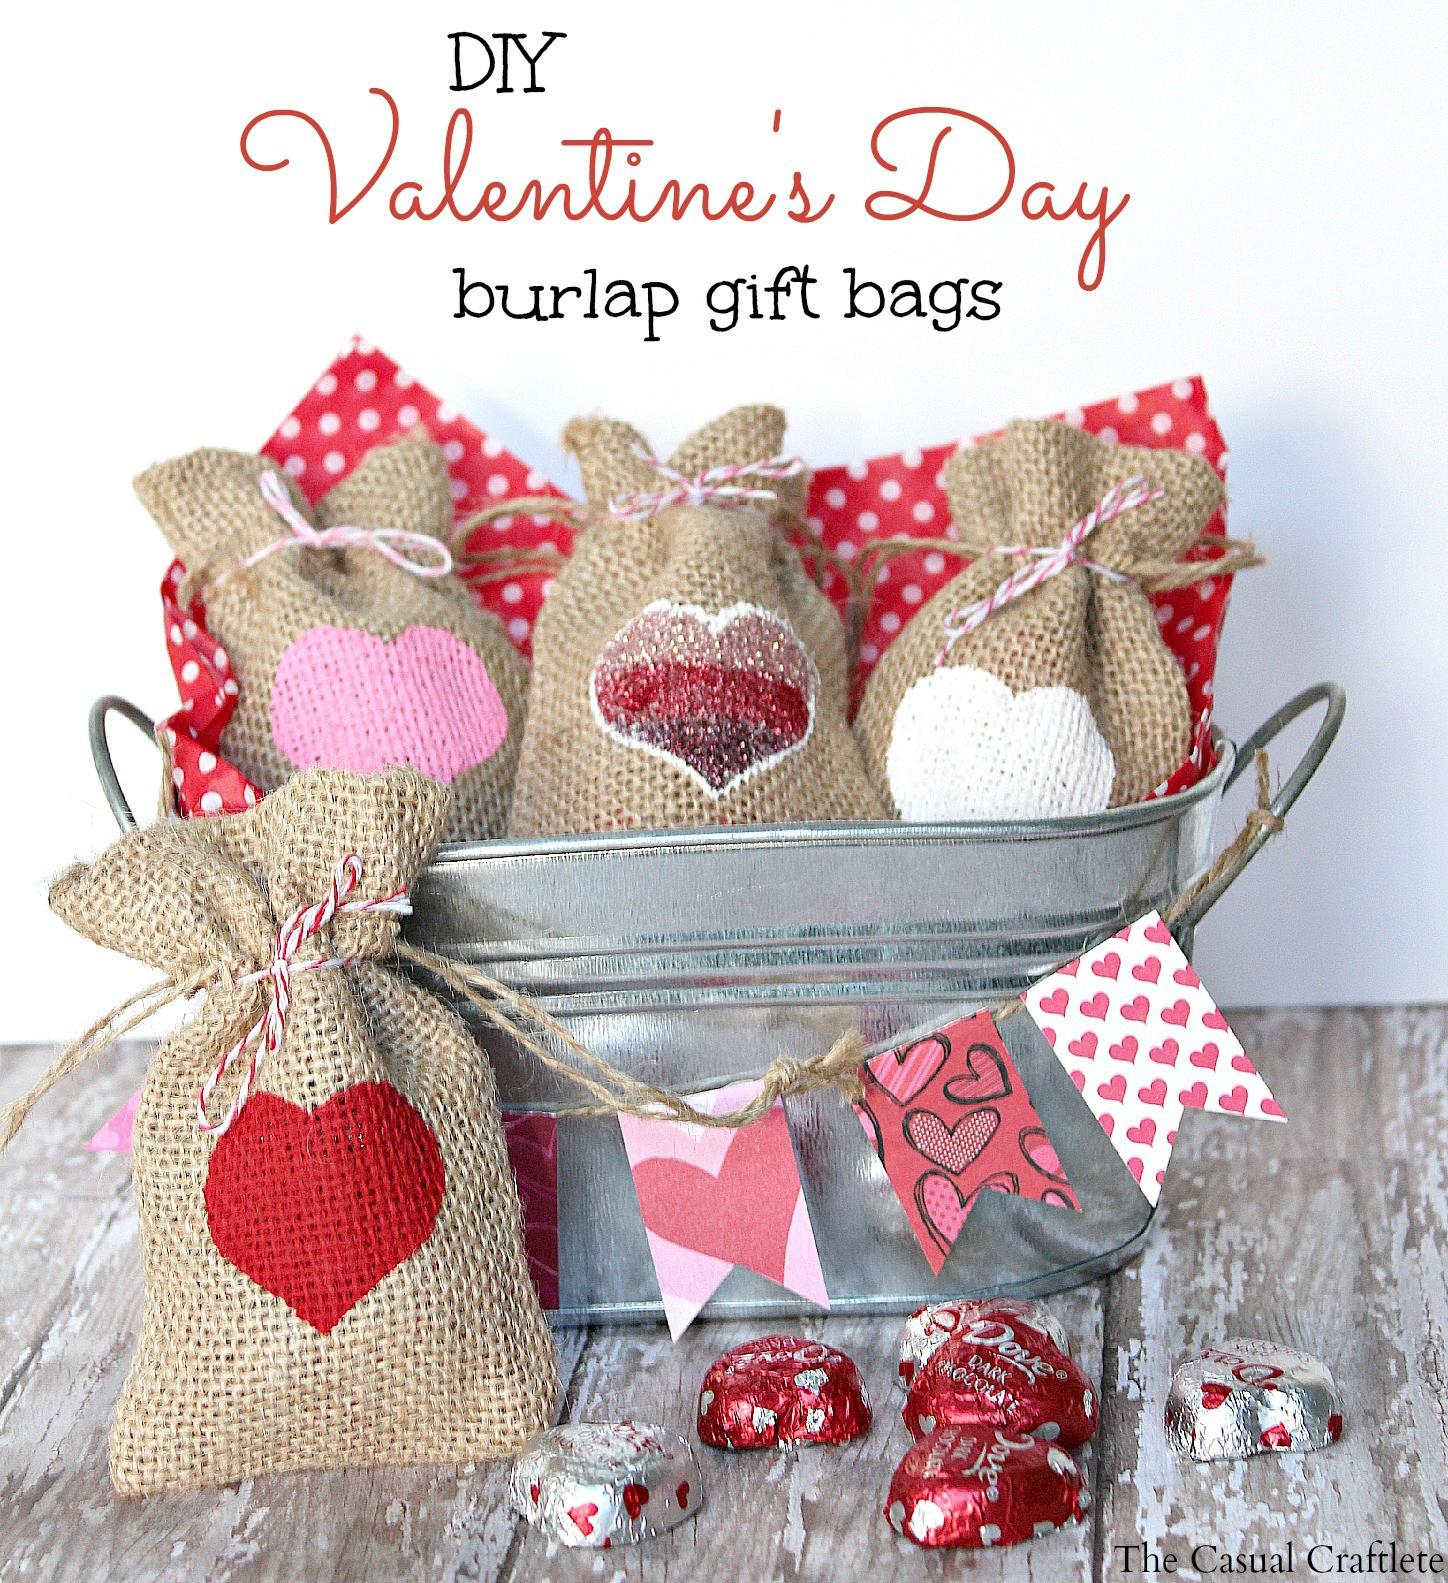 Top Valentines Day Gifts
 DIY Valentine s Day Burlap Gift Bags